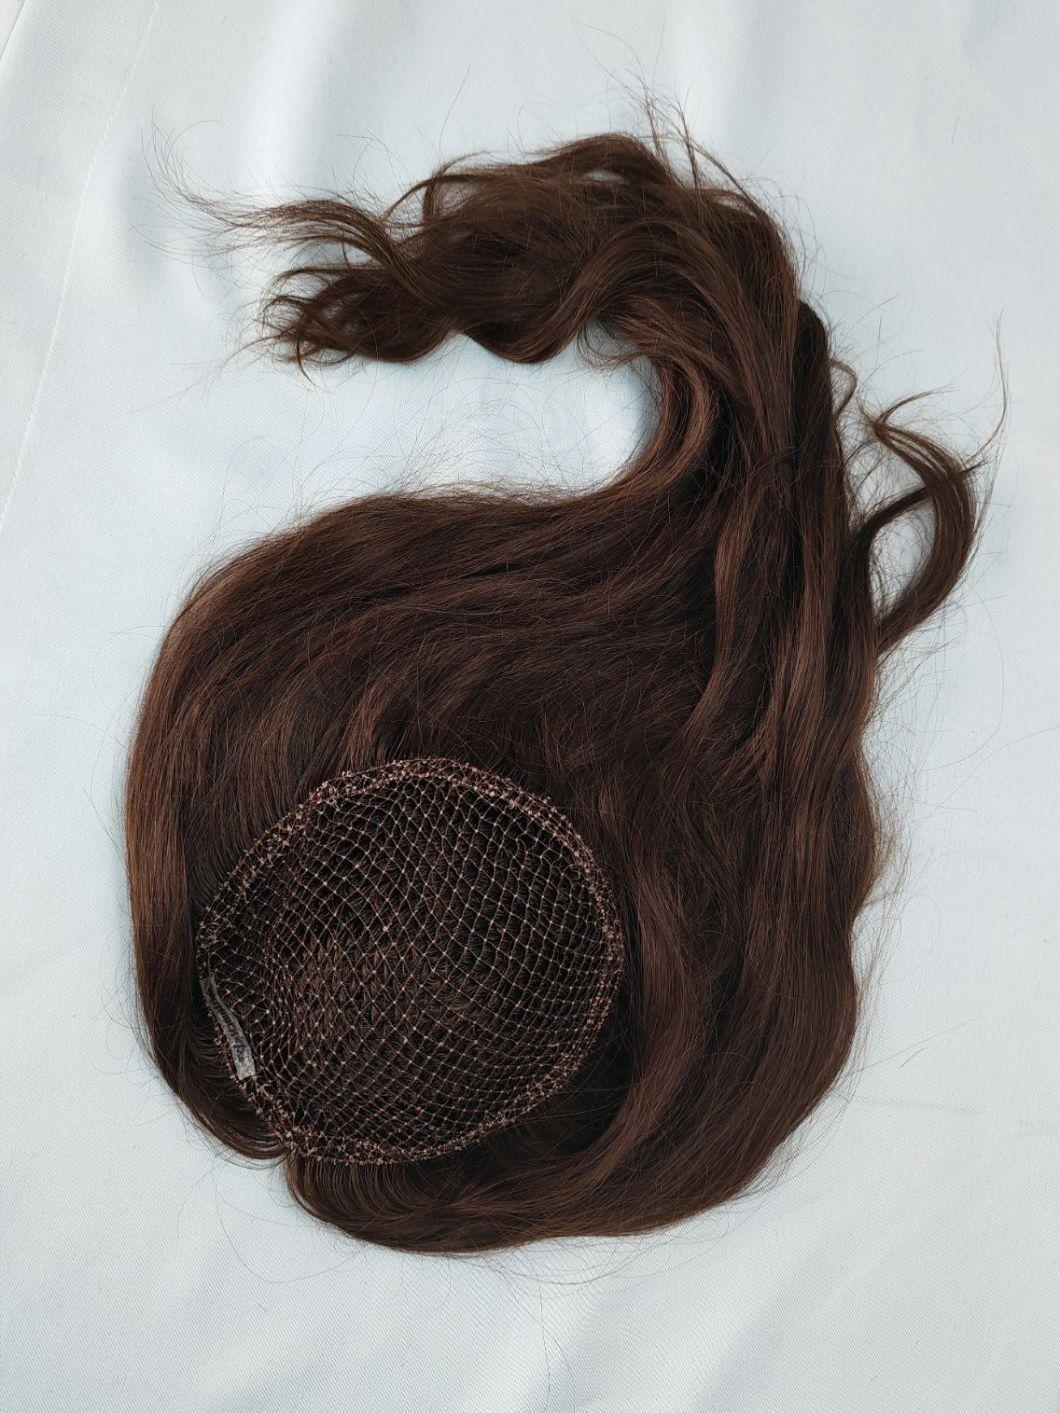 2022 Most Comfortable Human Remy Hair Integration Made of Fish Net and Swiss Lace Toupee